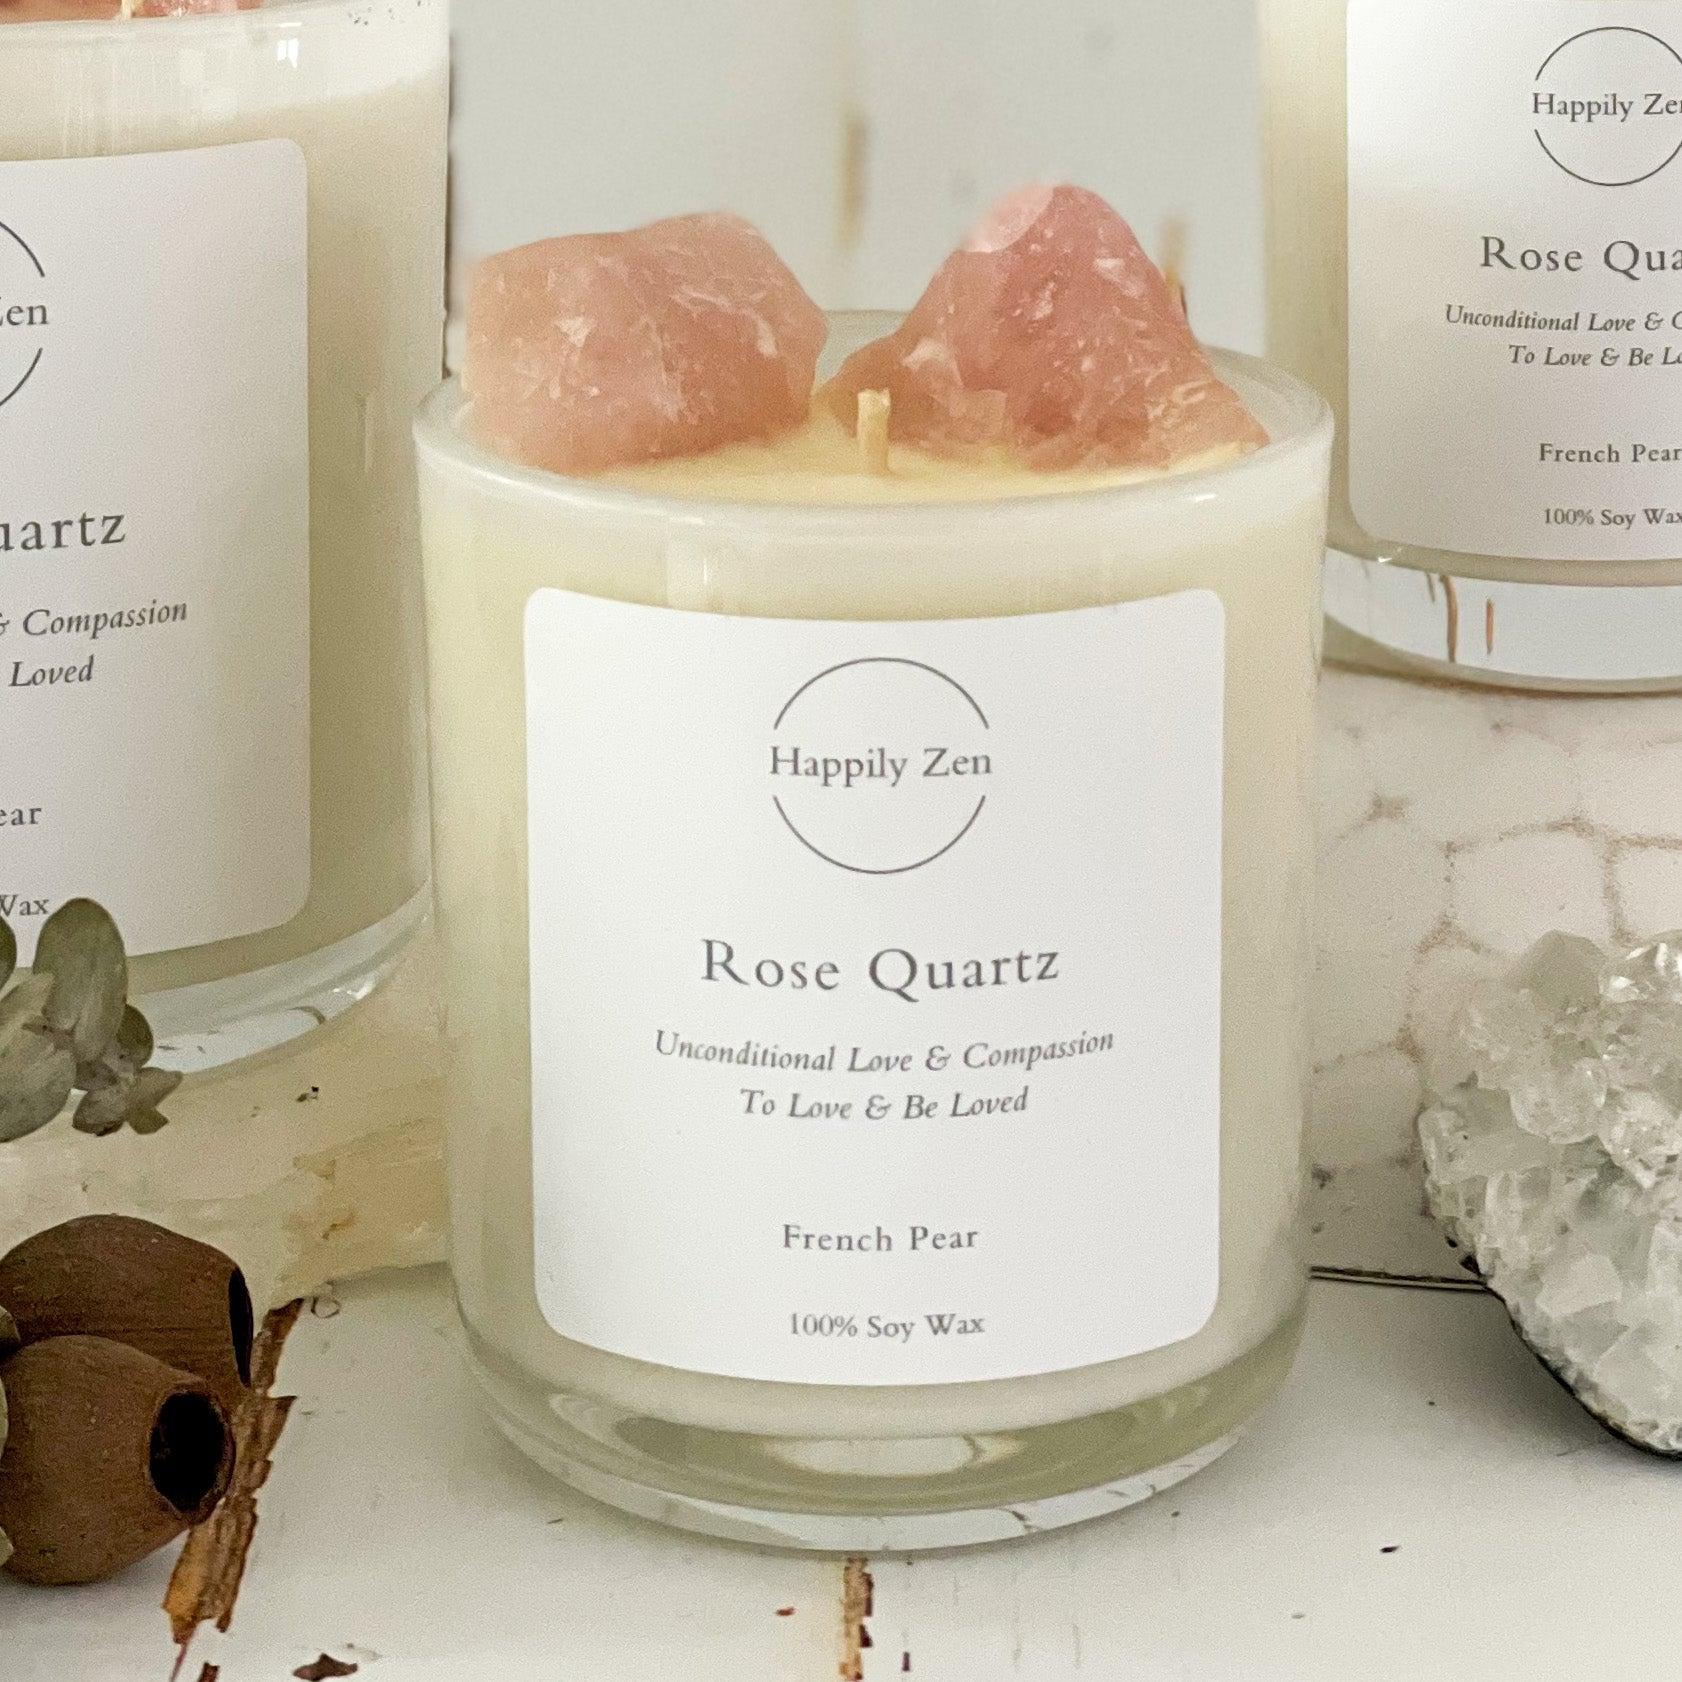 Rose Quartz - French Pear Candle-Happily Zen